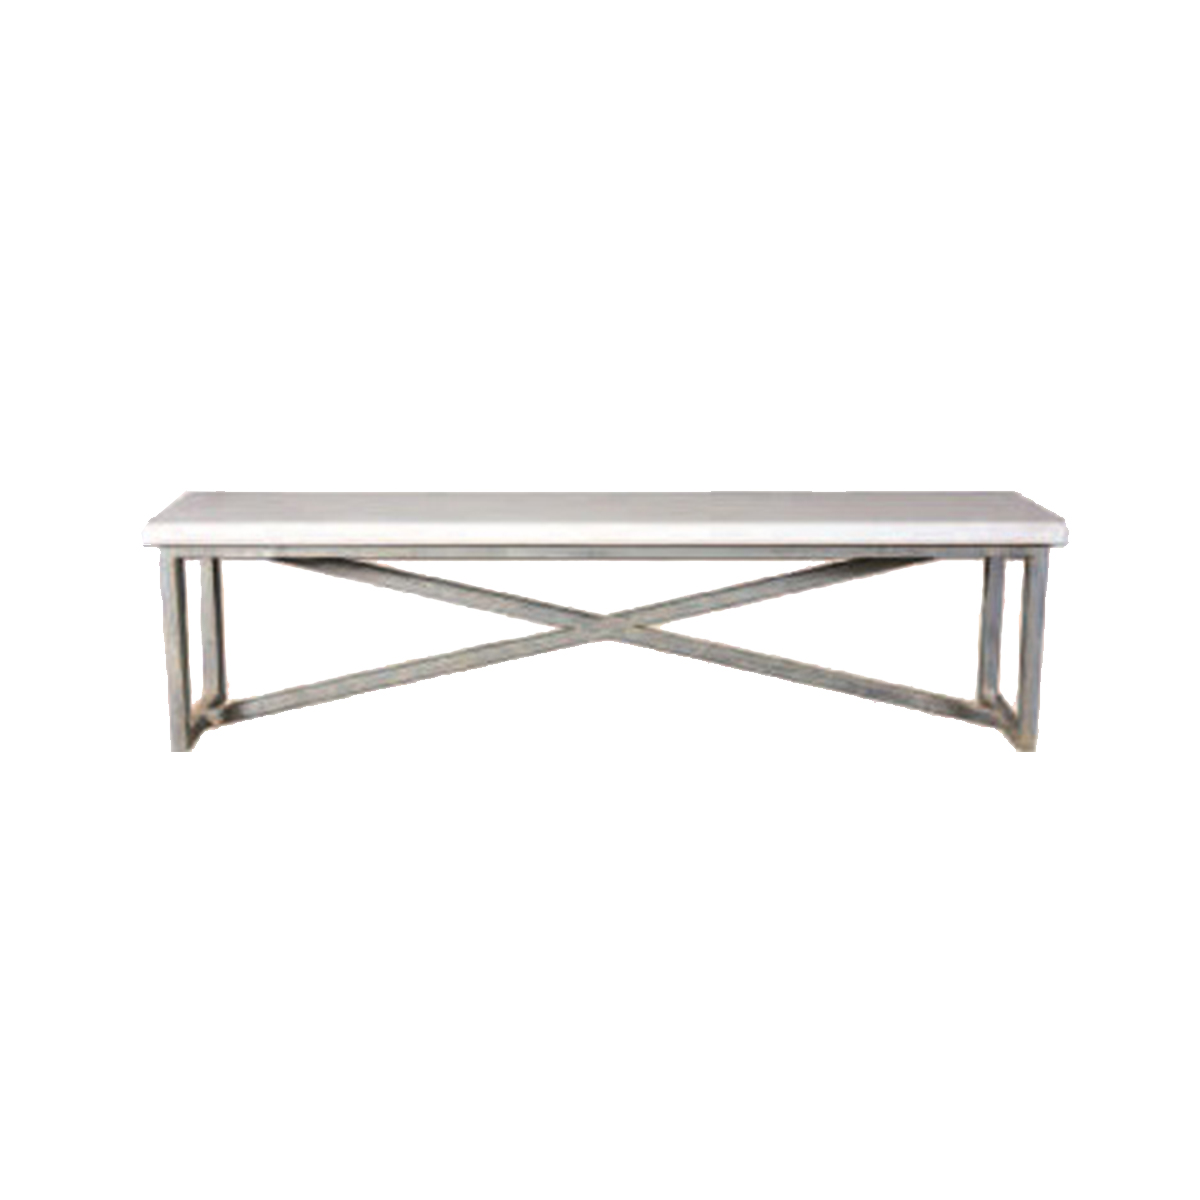 Featured image for “74" Marfa Bench”